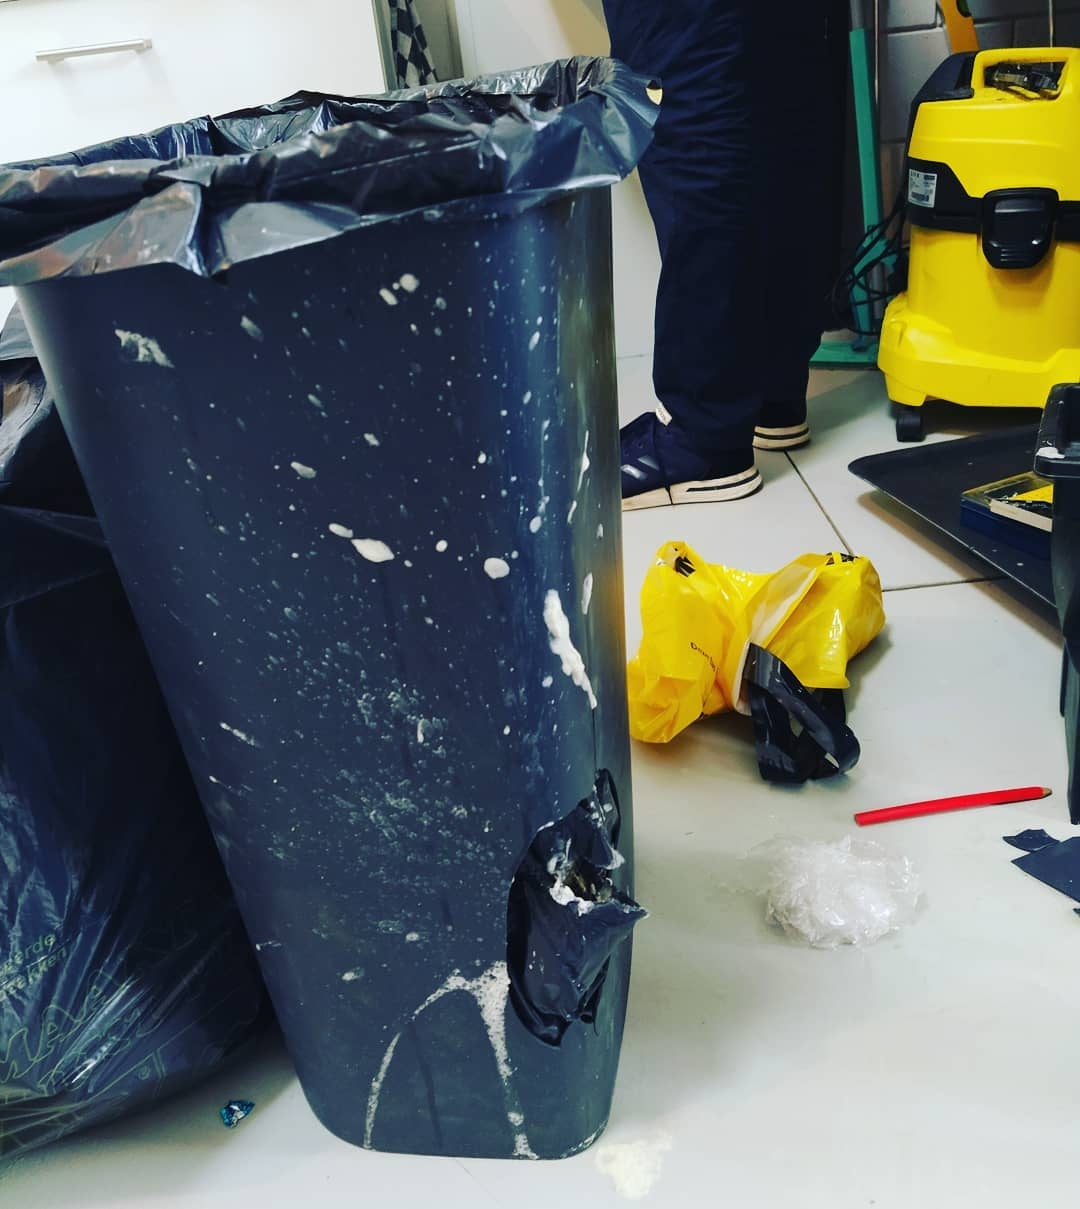 Trash can destroyed by Pinã Colada explosion